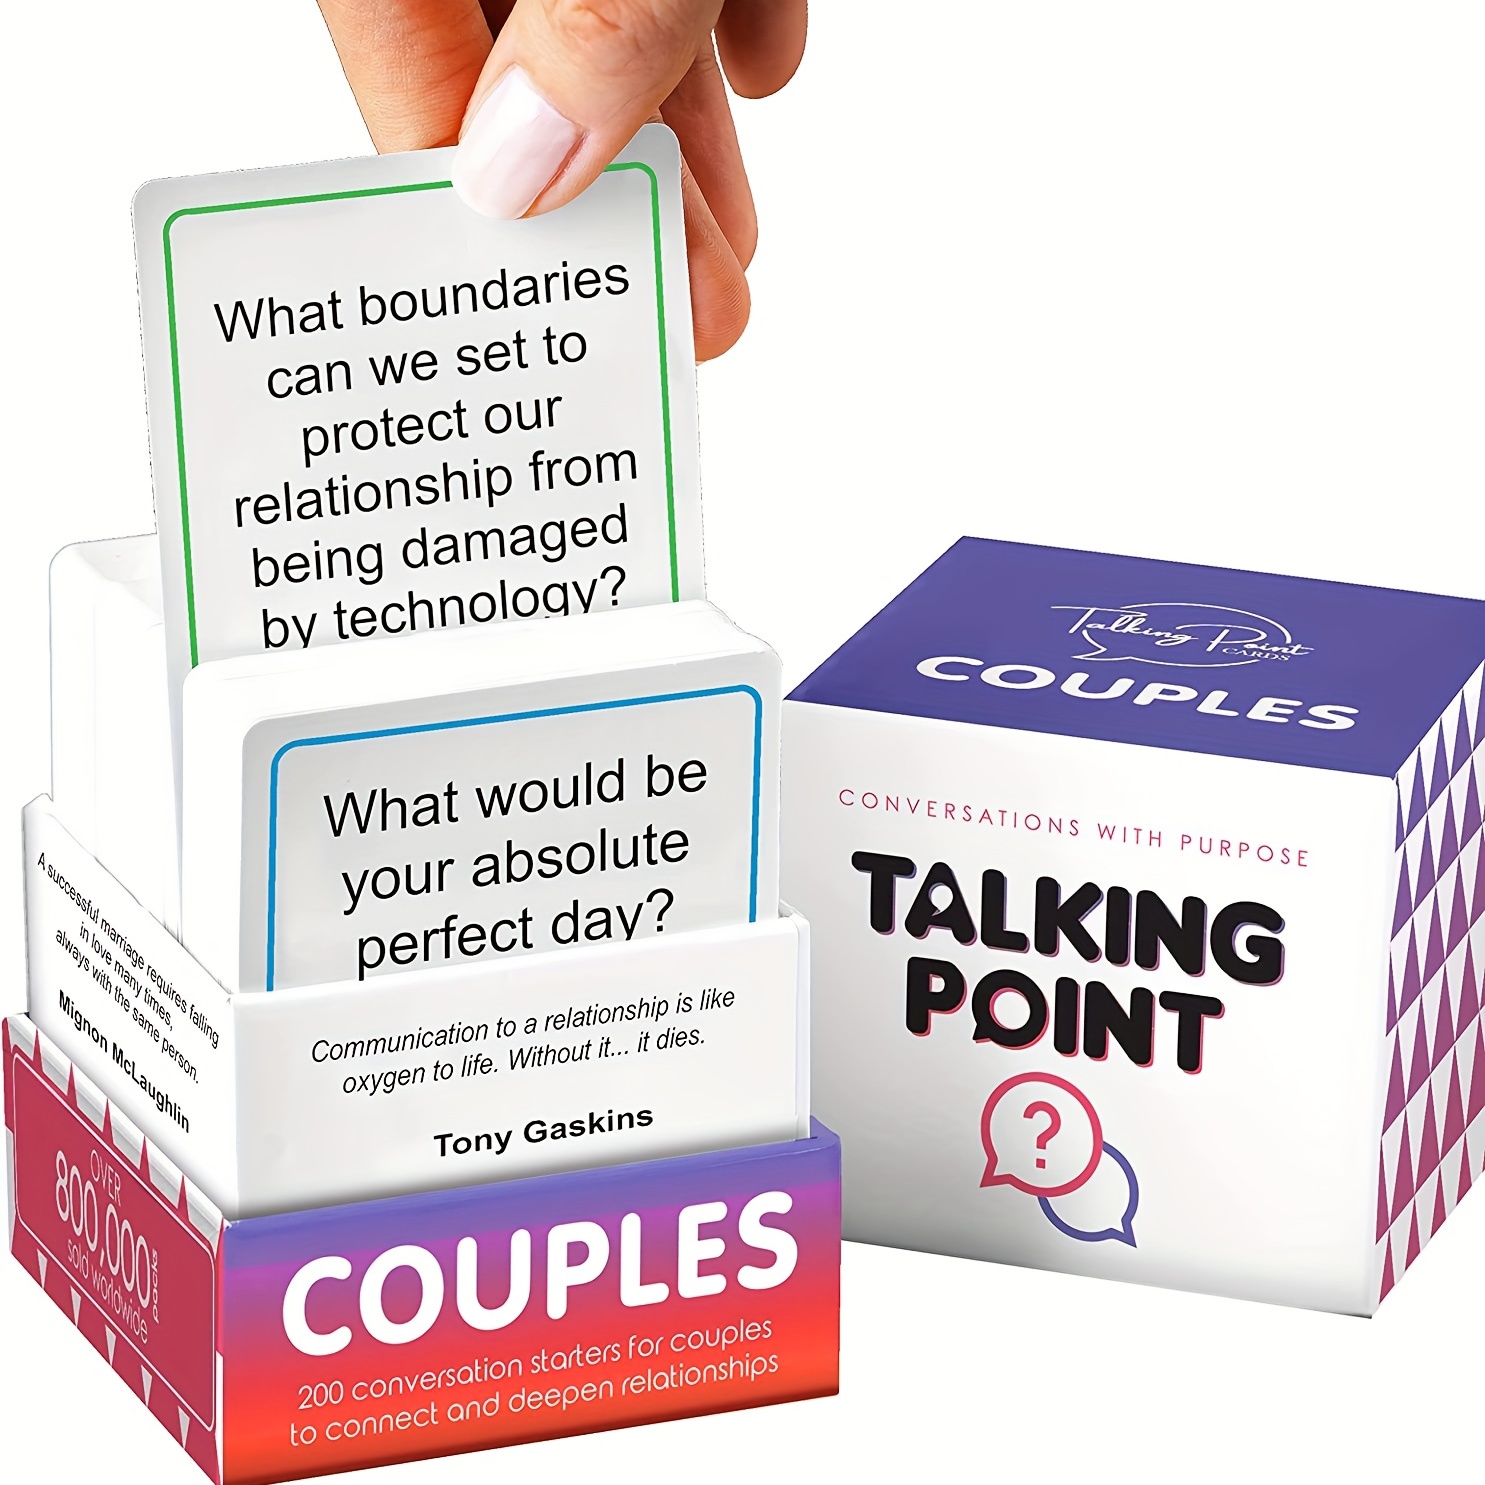 Couple Romantic Card Game Game Deck Talk Or Flirt Or Dare Cards 3